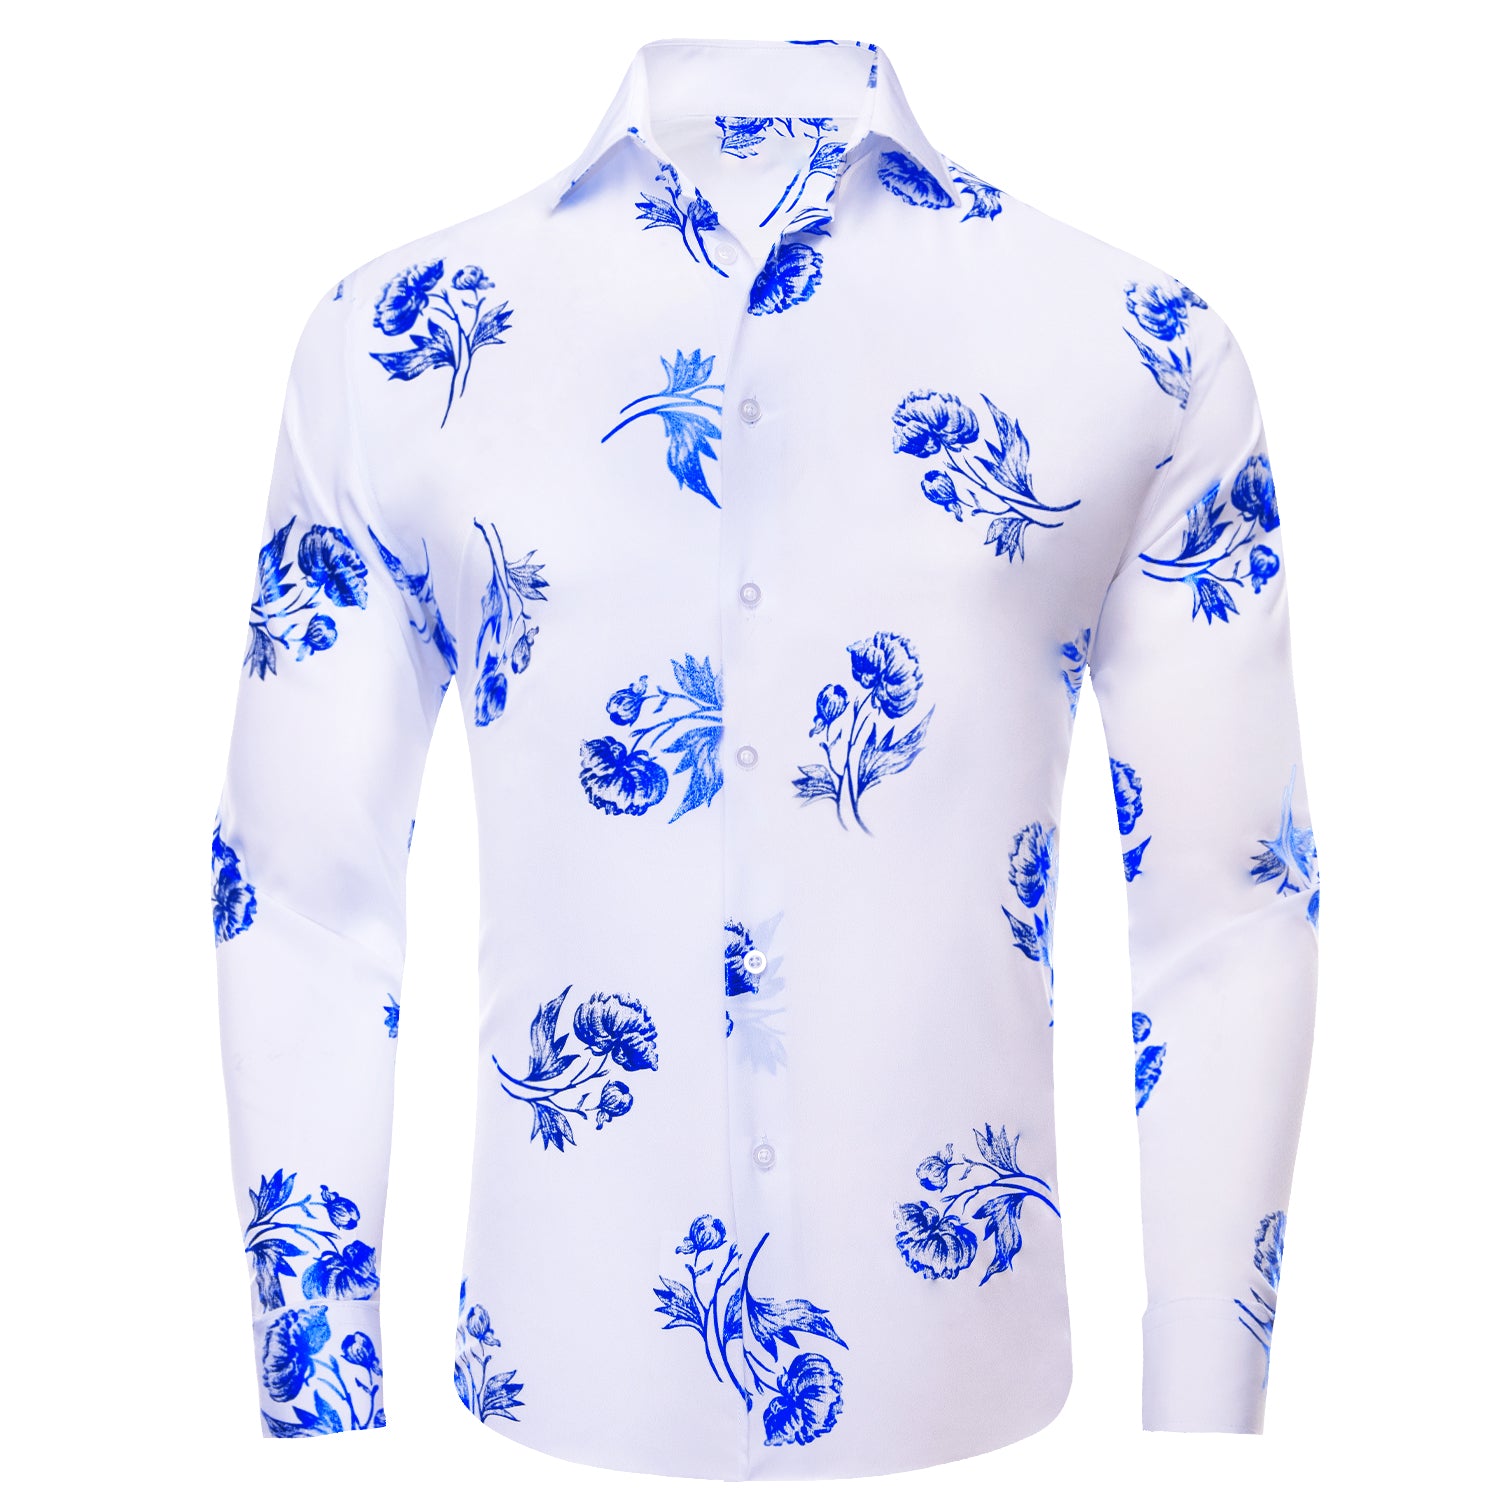 White long sleeve shirt with blue roses